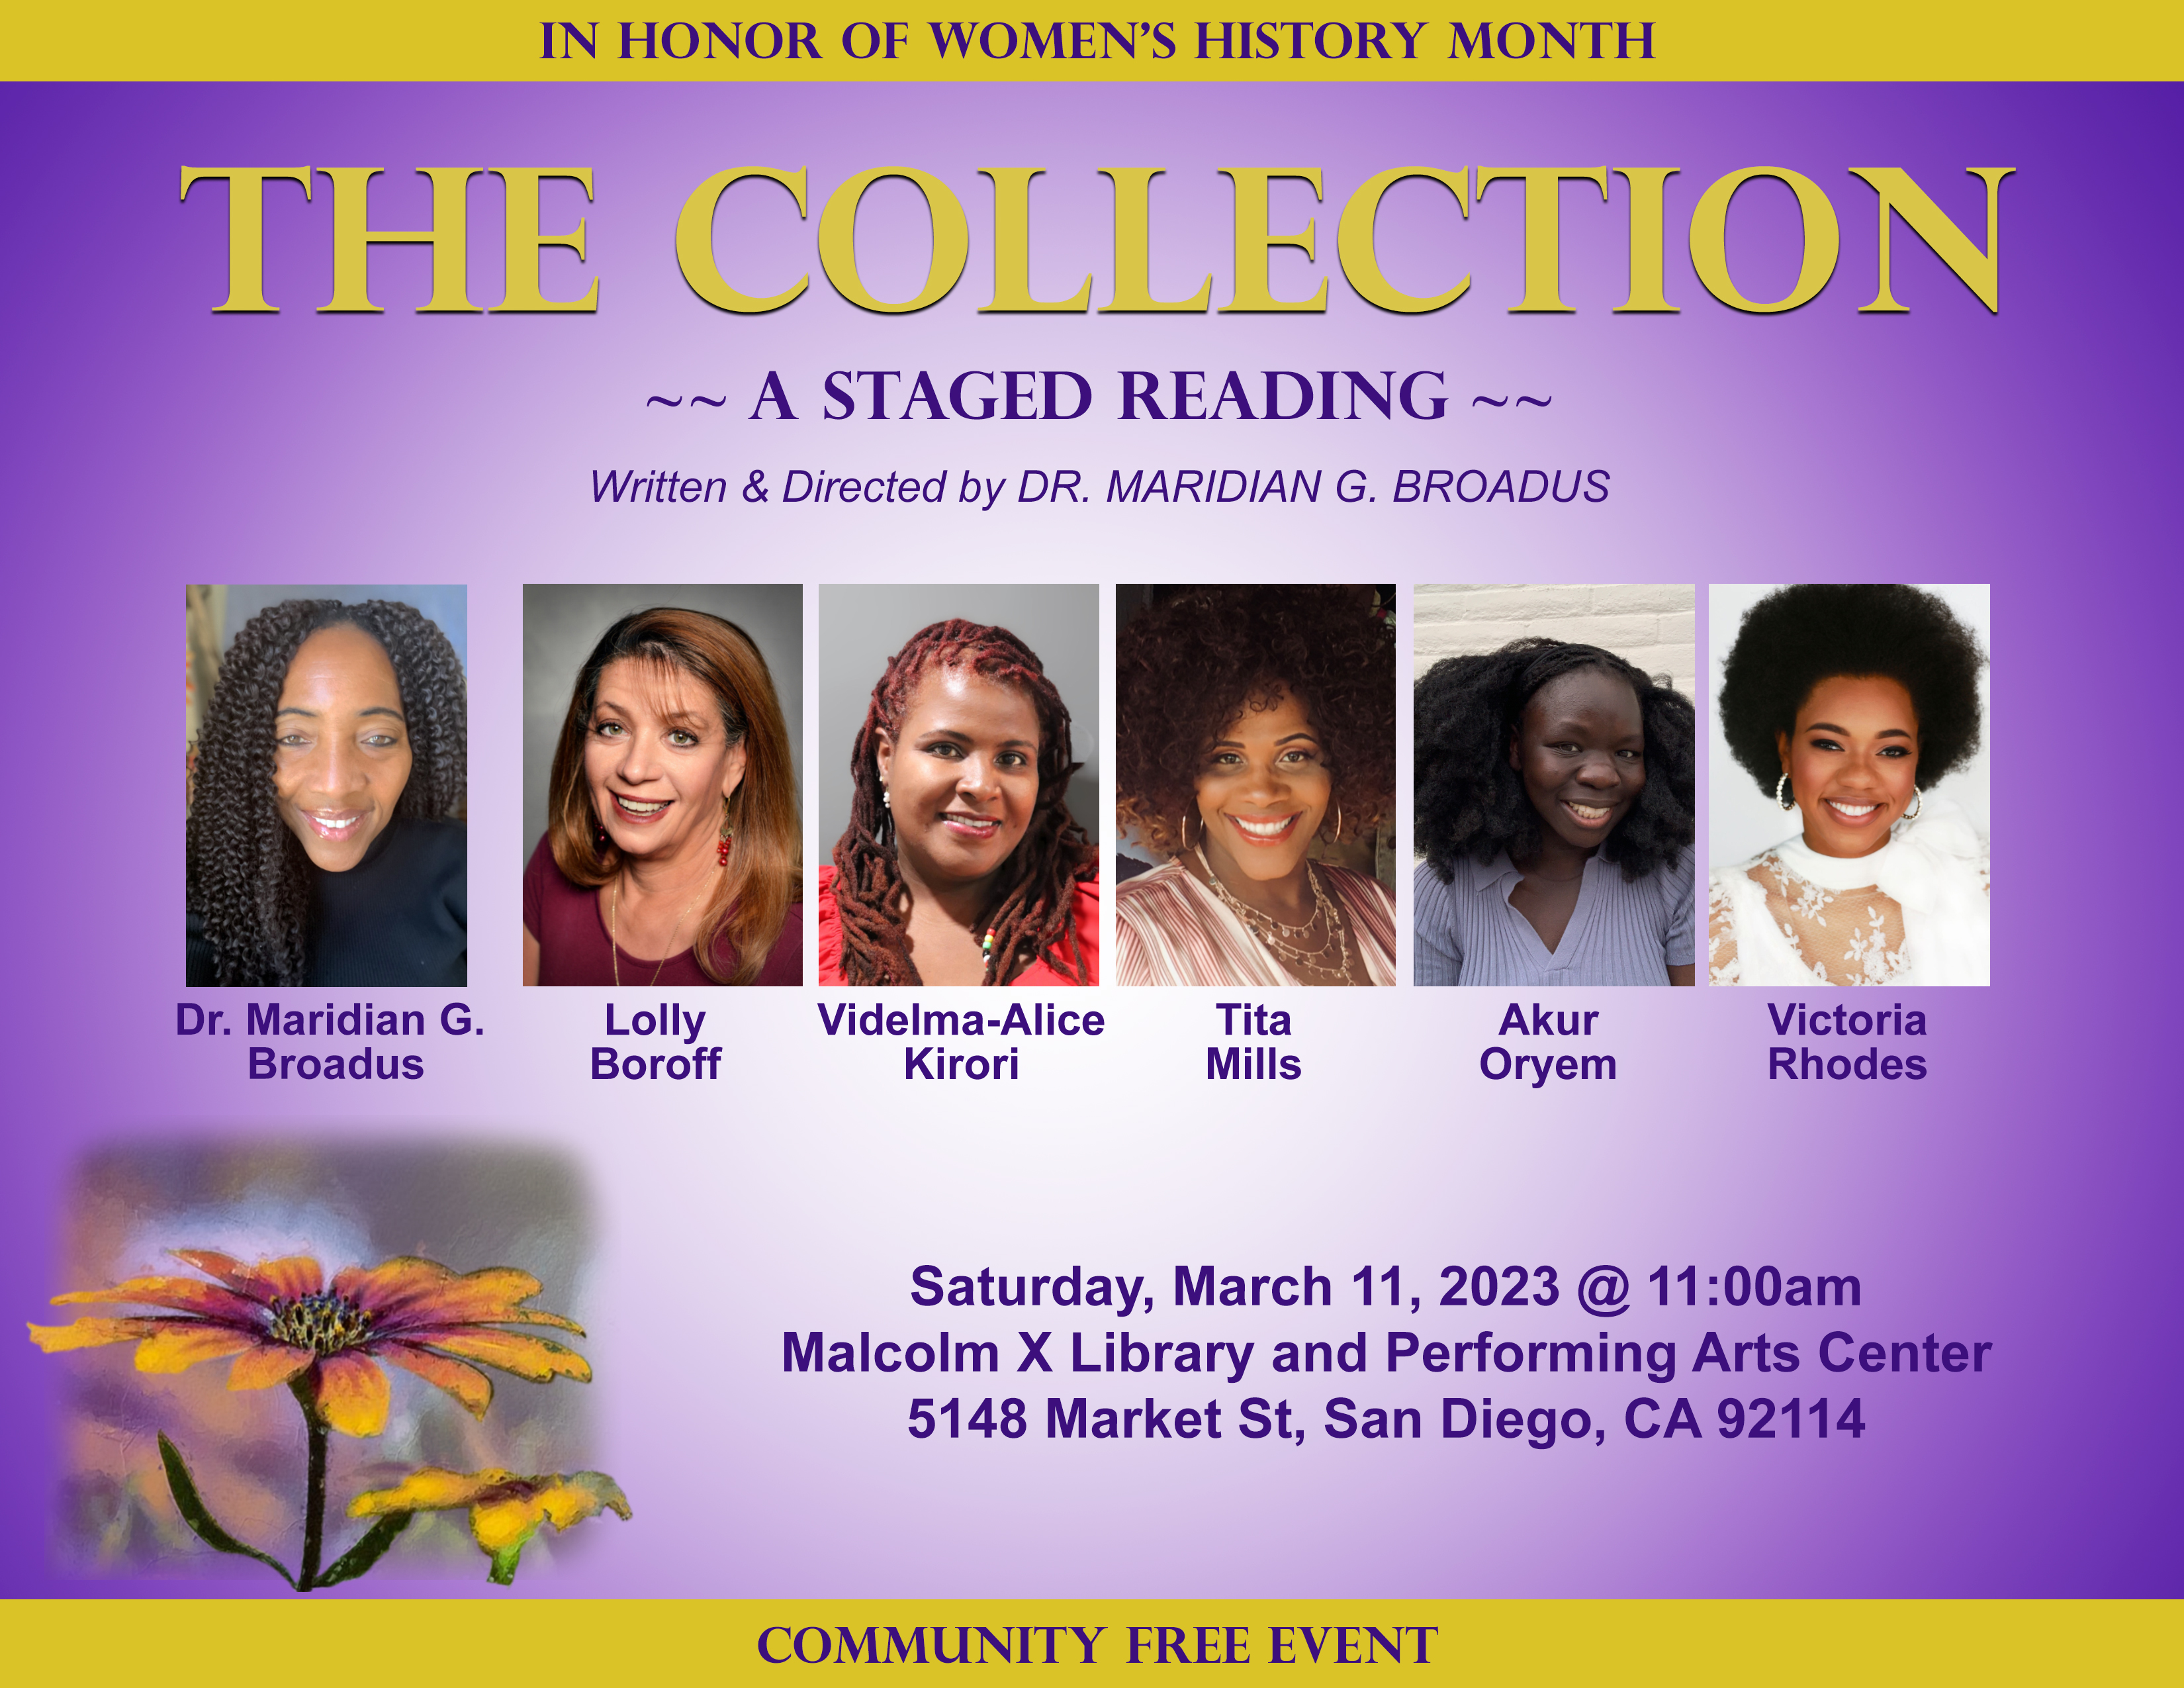 Text and pictures of the performers in The Collection, written and directed by Dr. Maridian G. Broadus.